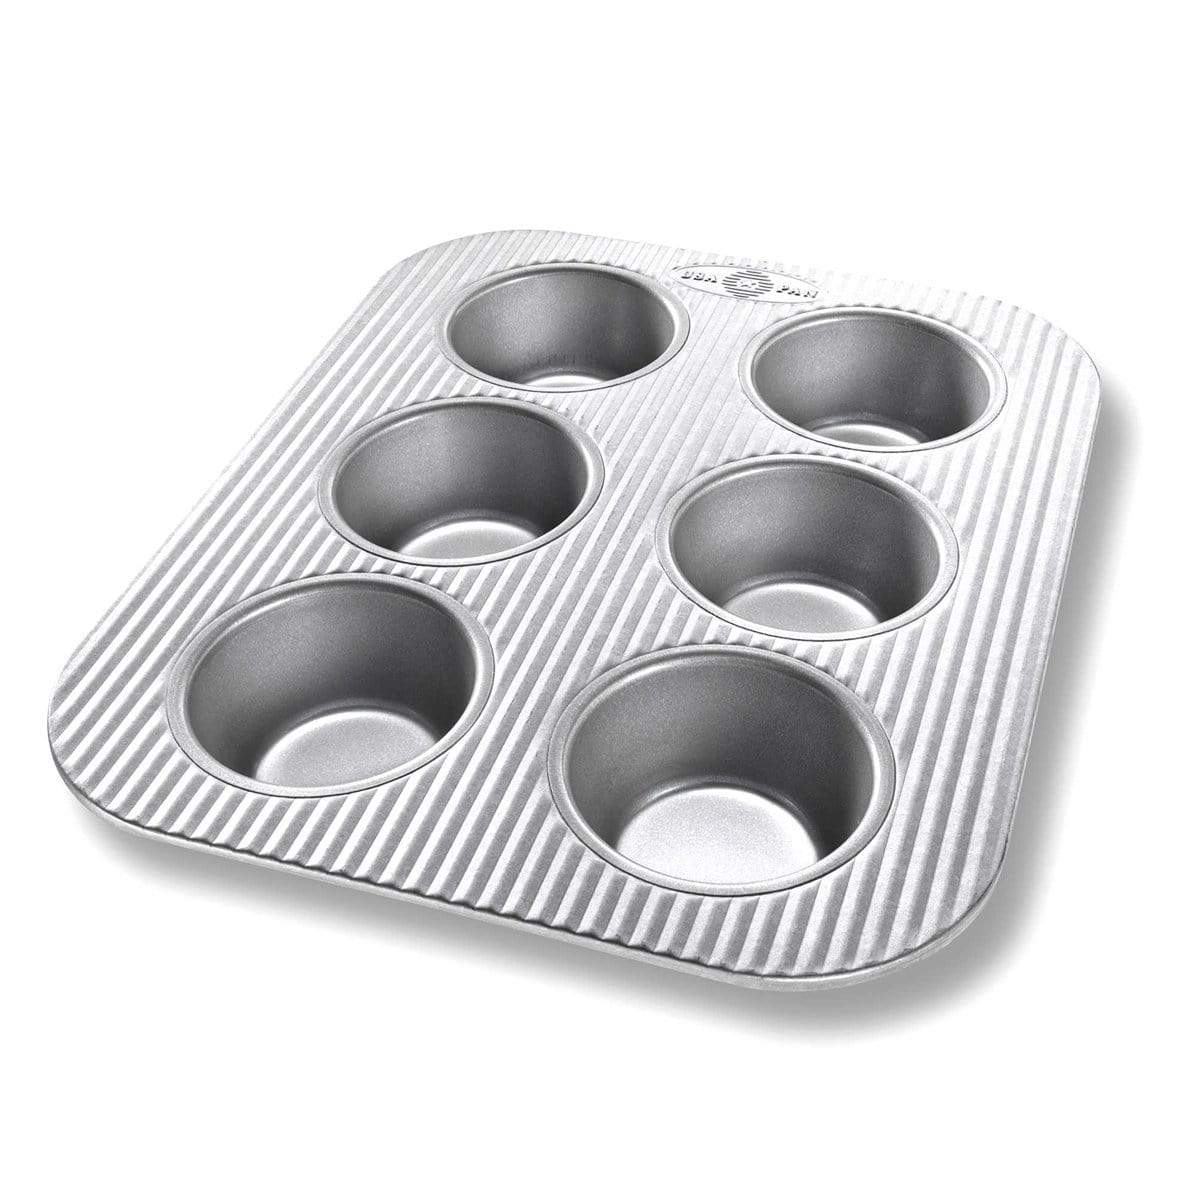 https://cdn.shopify.com/s/files/1/0474/2338/9856/products/usa-pan-usa-pan-6-cup-toaster-oven-muffin-pan-854776005086-19595492982944_2000x.jpg?v=1604601620